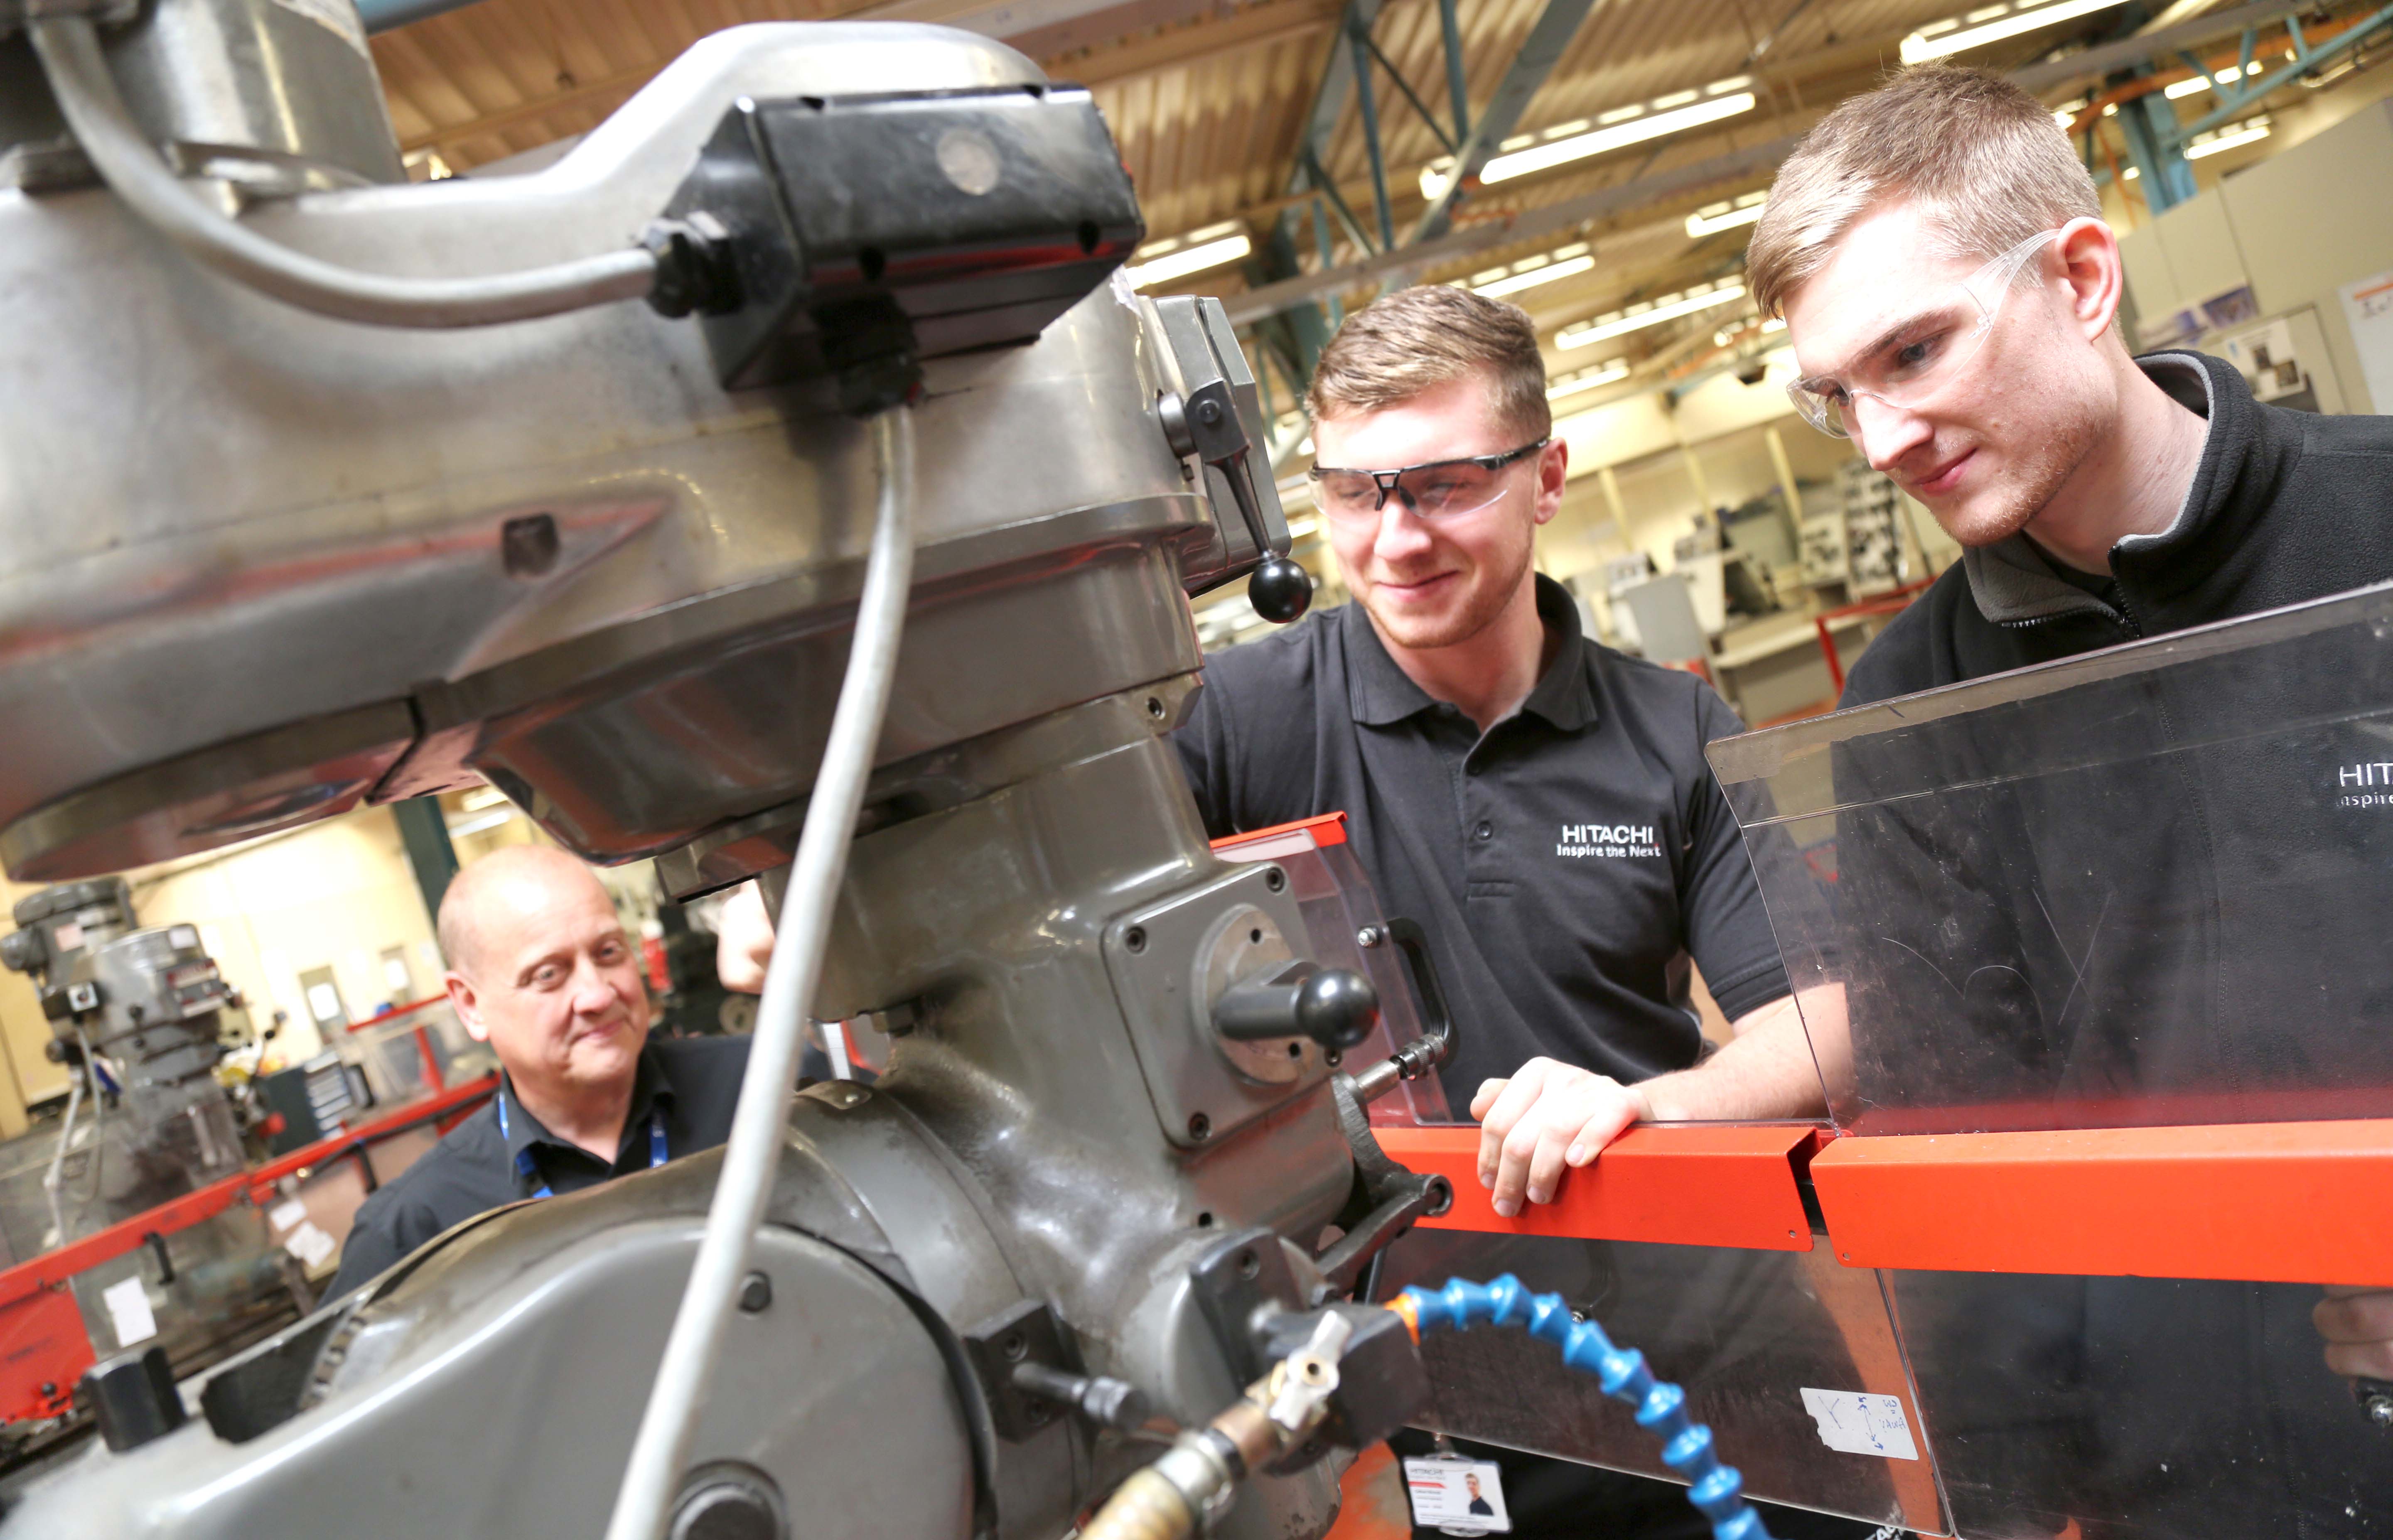 SWDT Apprentice Package Produces the Right Skills